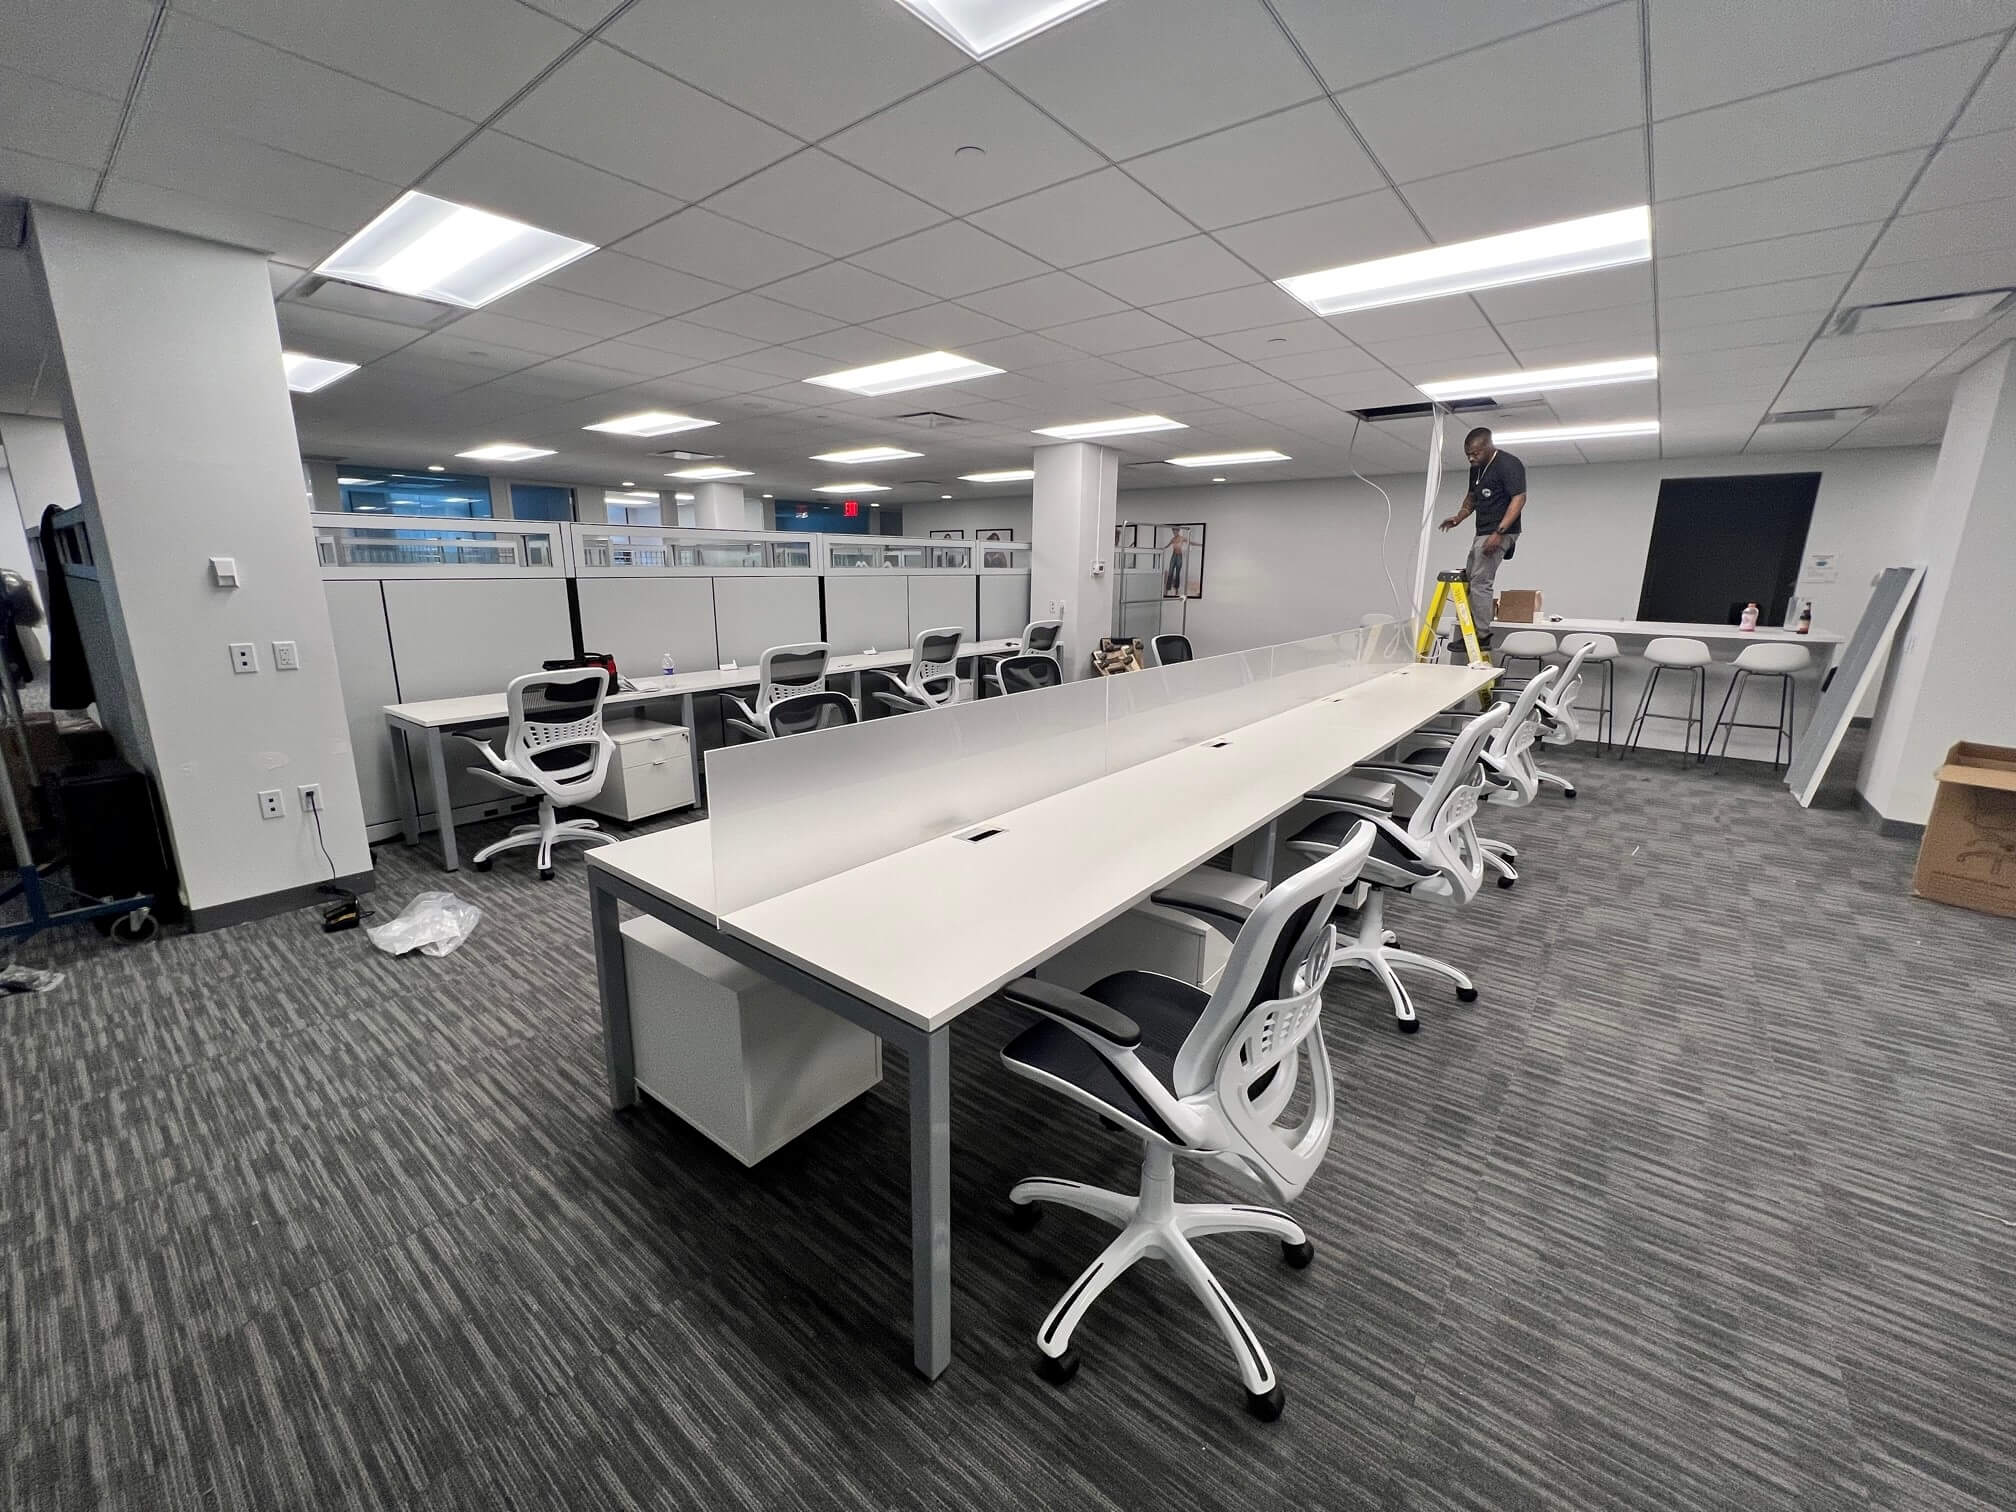 New Jersey’s Top new and used office furniture store outfitting businesses with modern and clean office fixtures.